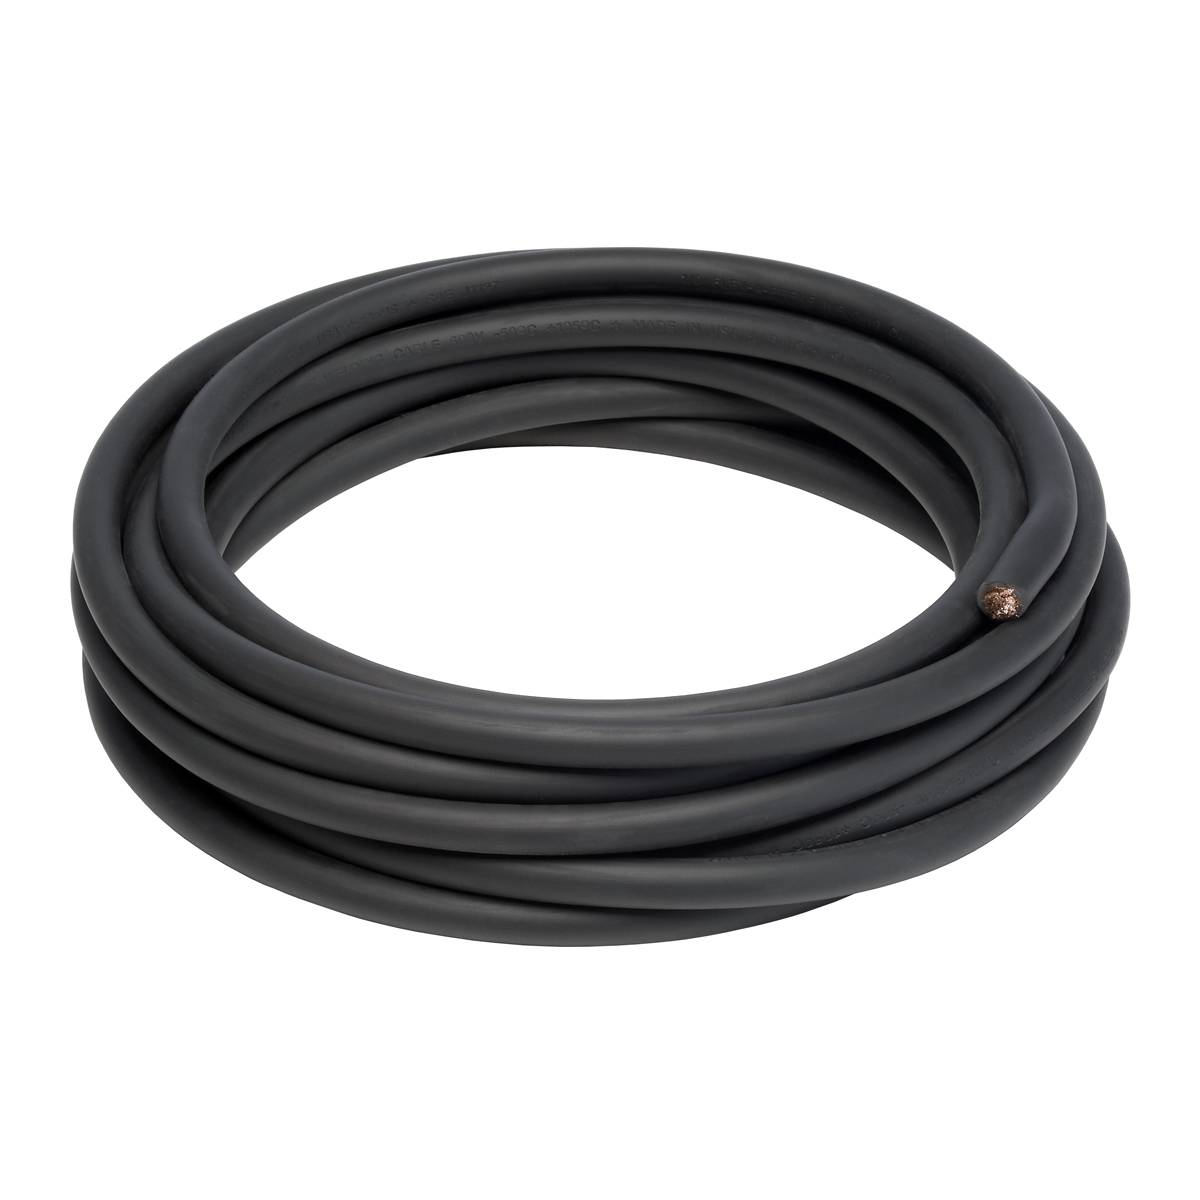 Ultra-Flex Welding Cable - #2, #1, 1/0 & 2/0 (Priced Per Foot) -  , Inc